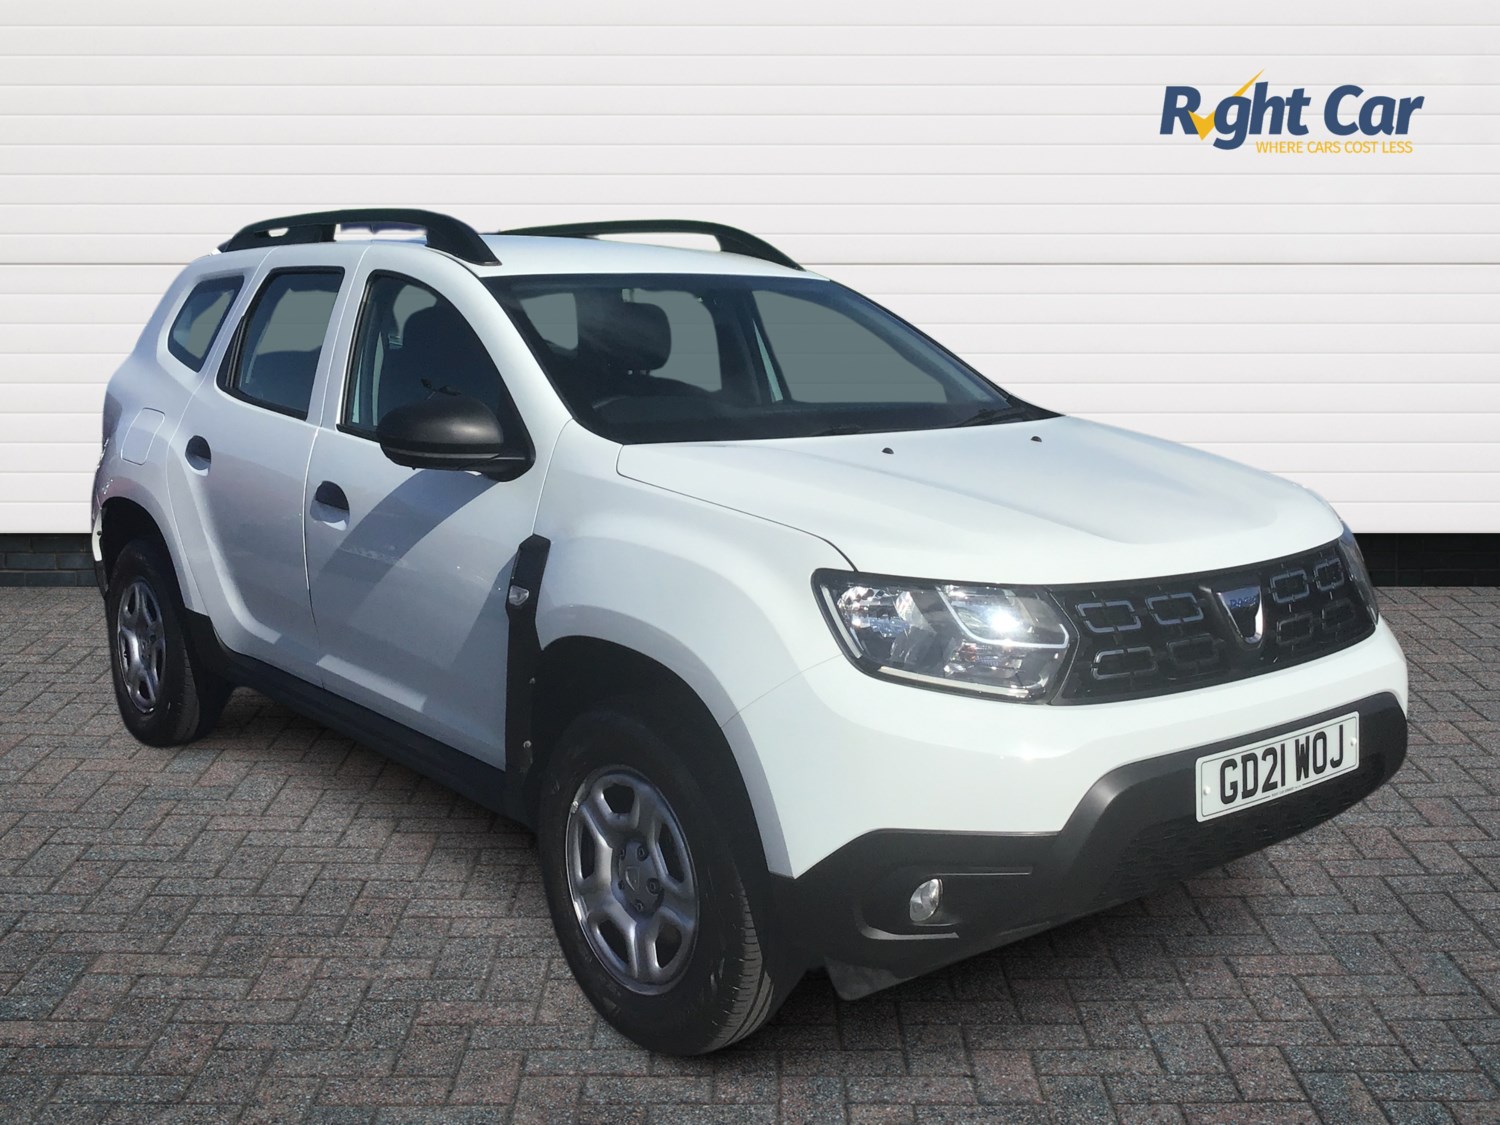 2021 used Dacia Duster 1.0 Tce 100 Essential